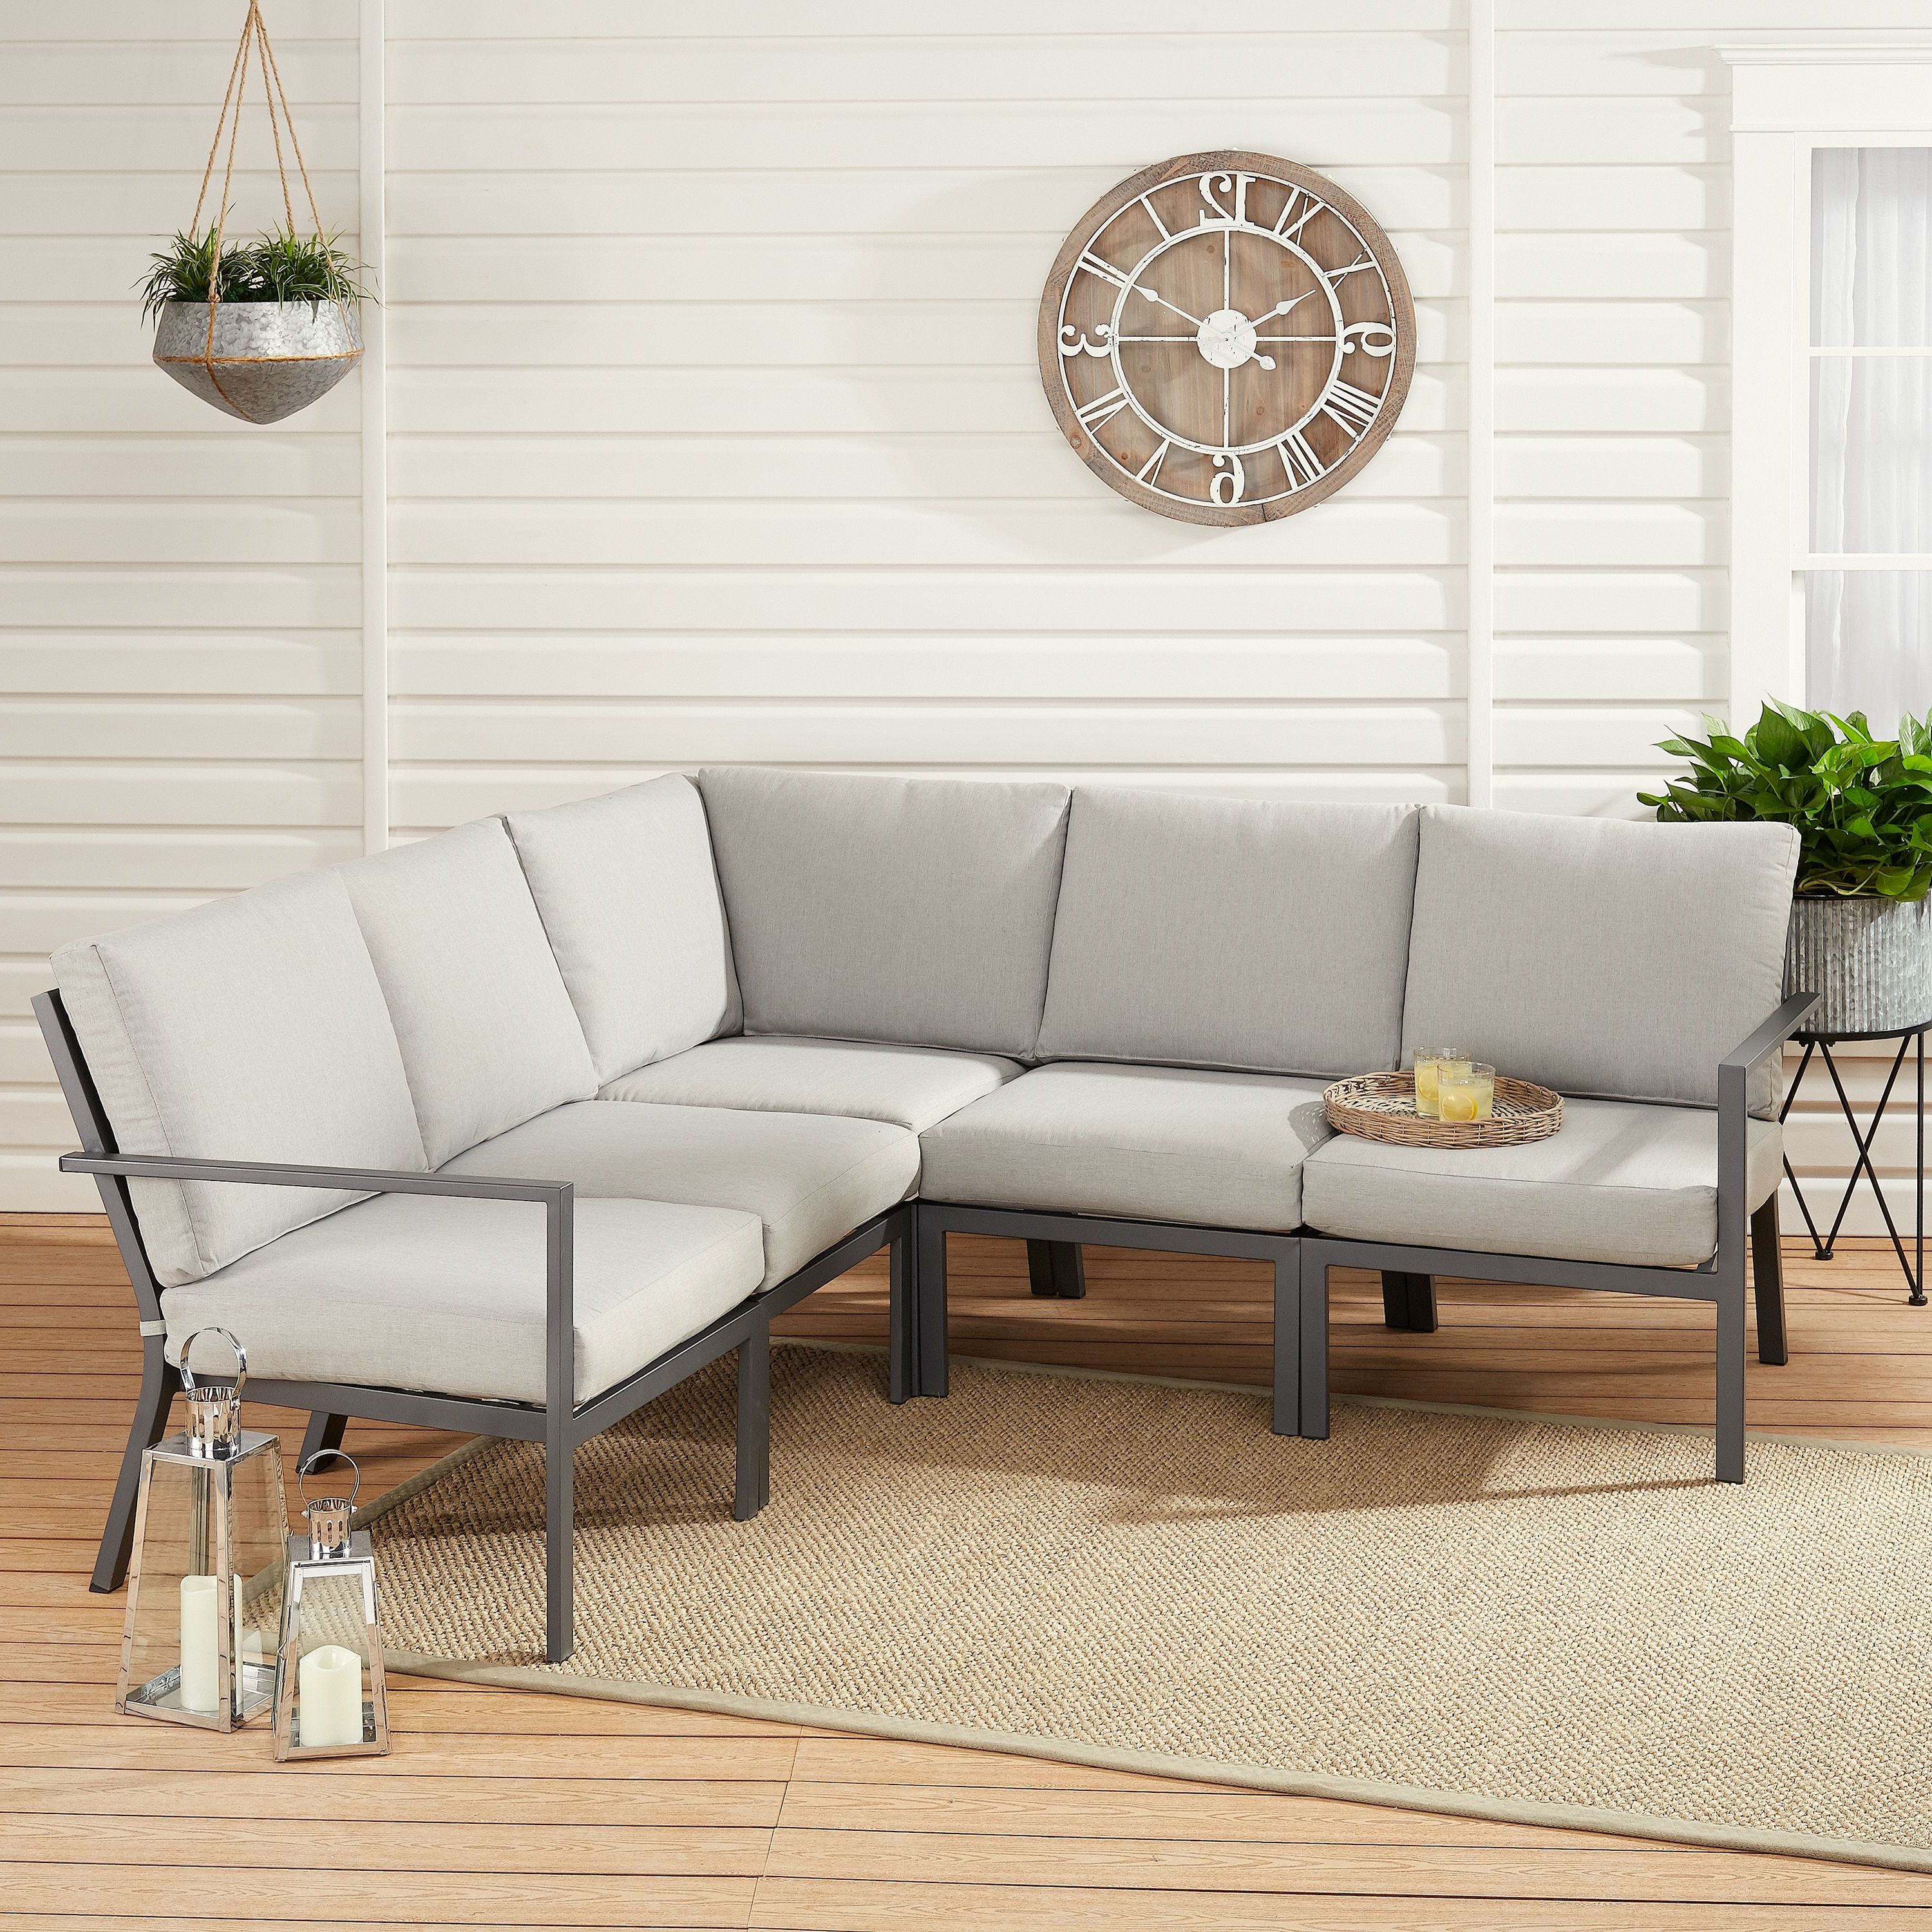 Hursey Patio Sectionals Pertaining To Best And Newest Mainstays Neste Ridge 5 Piece Patio Sectional Set With Gray (View 8 of 20)